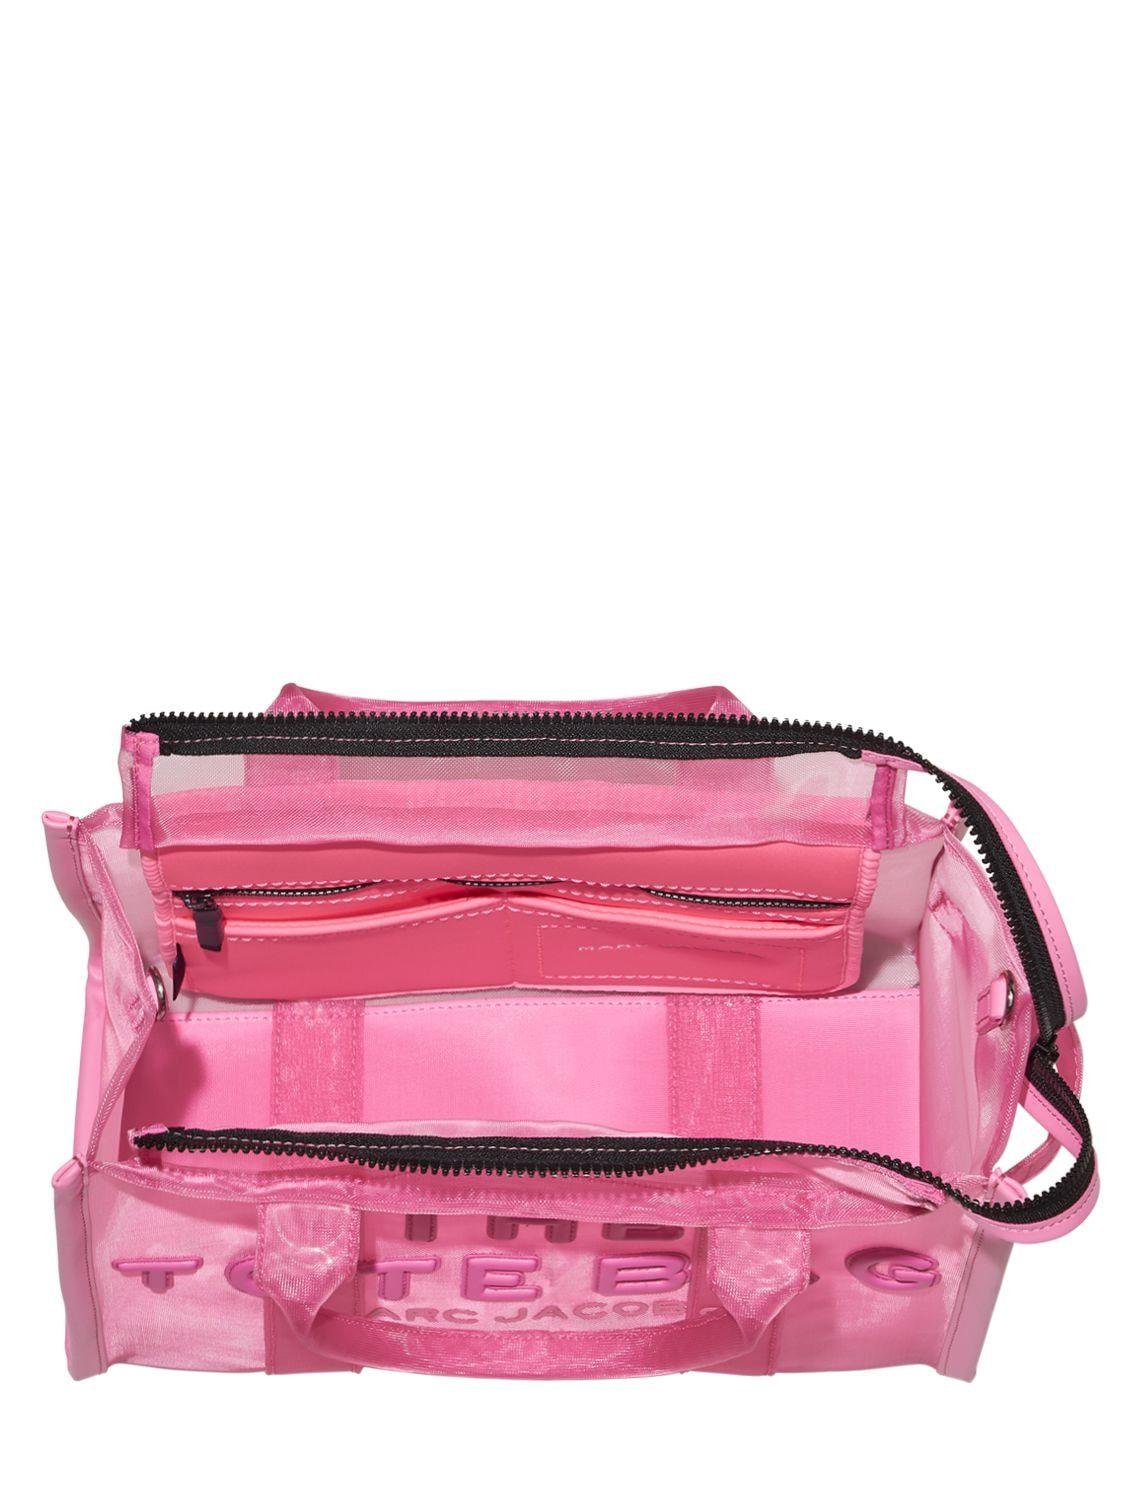 Marc Jacobs The Small Mesh Tote Bag in Pink